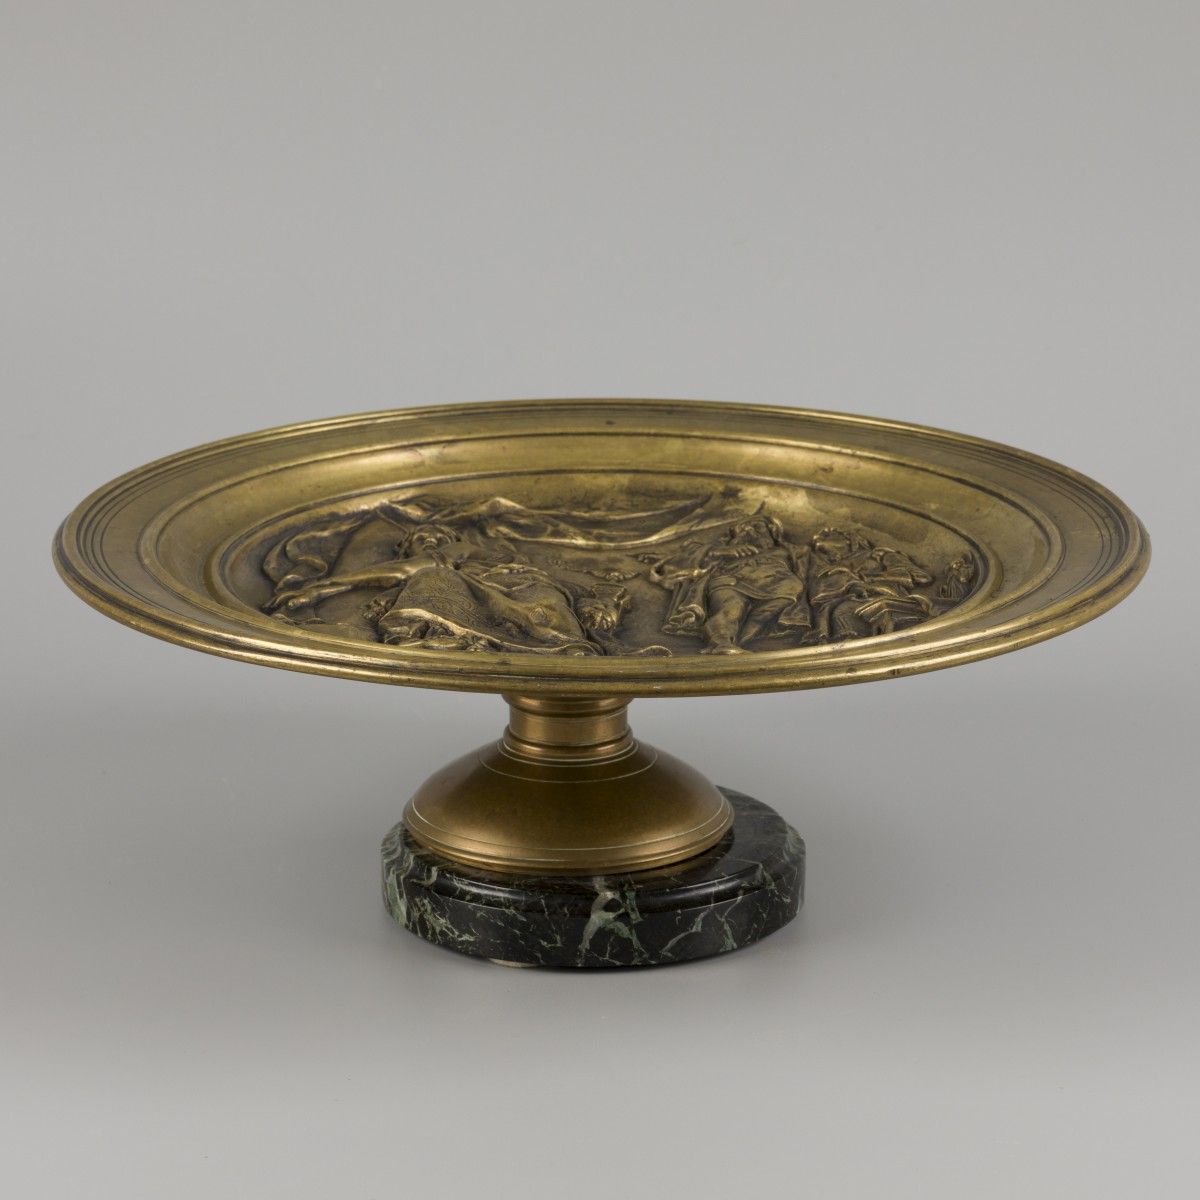 A bronze tazza with decor depicting a scene from 'Macbeth', England, ca. 1930. C&hellip;